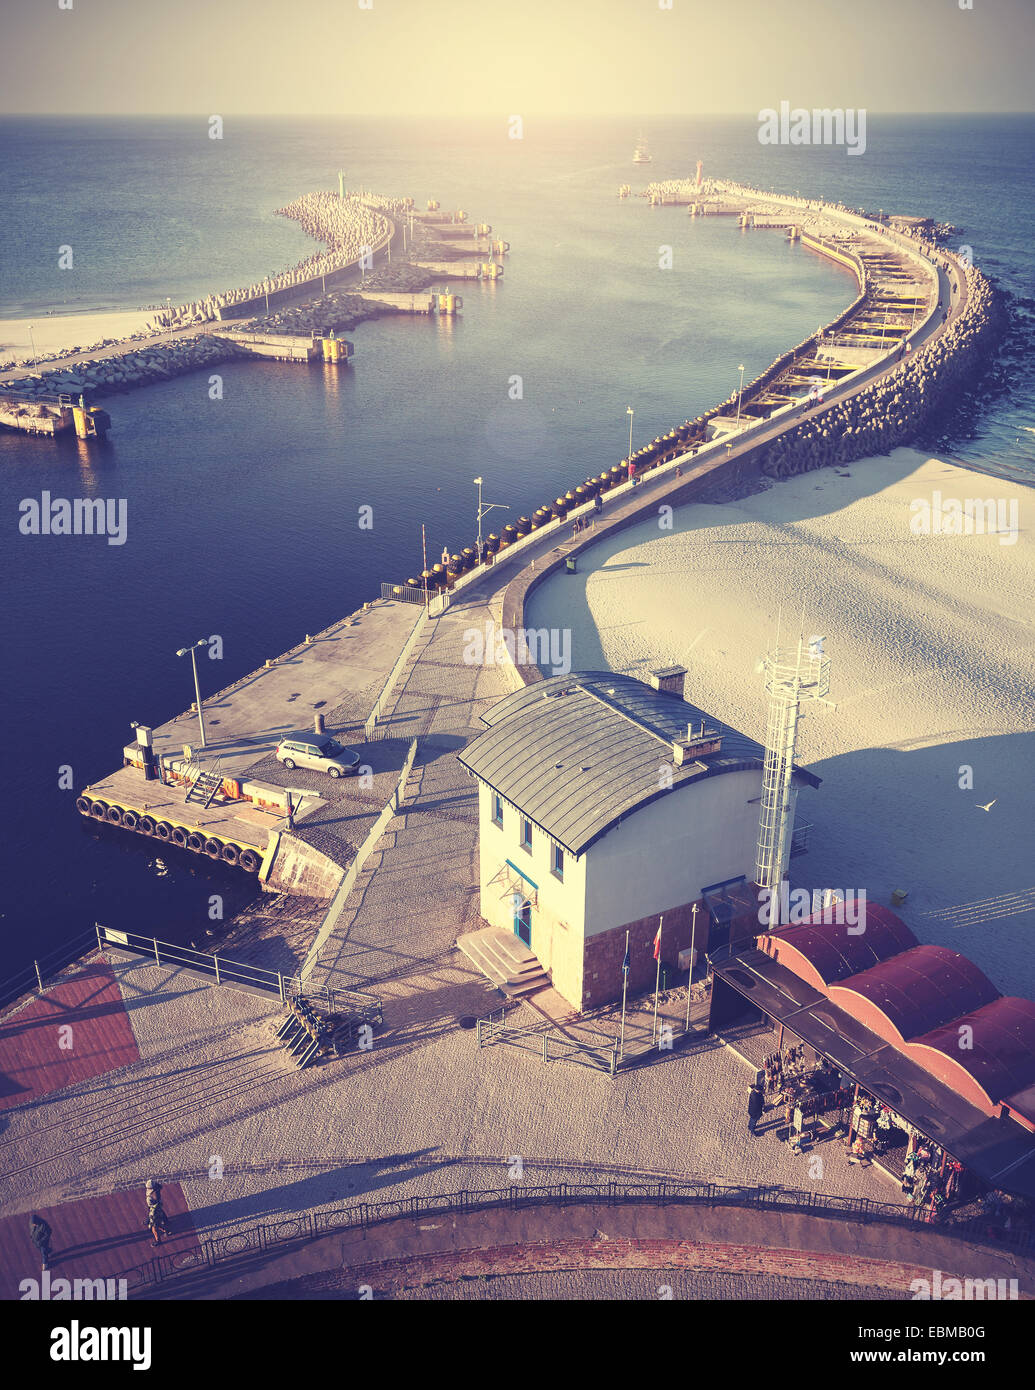 Vintage filtered picture of harbor in Kolobrzeg. Stock Photo